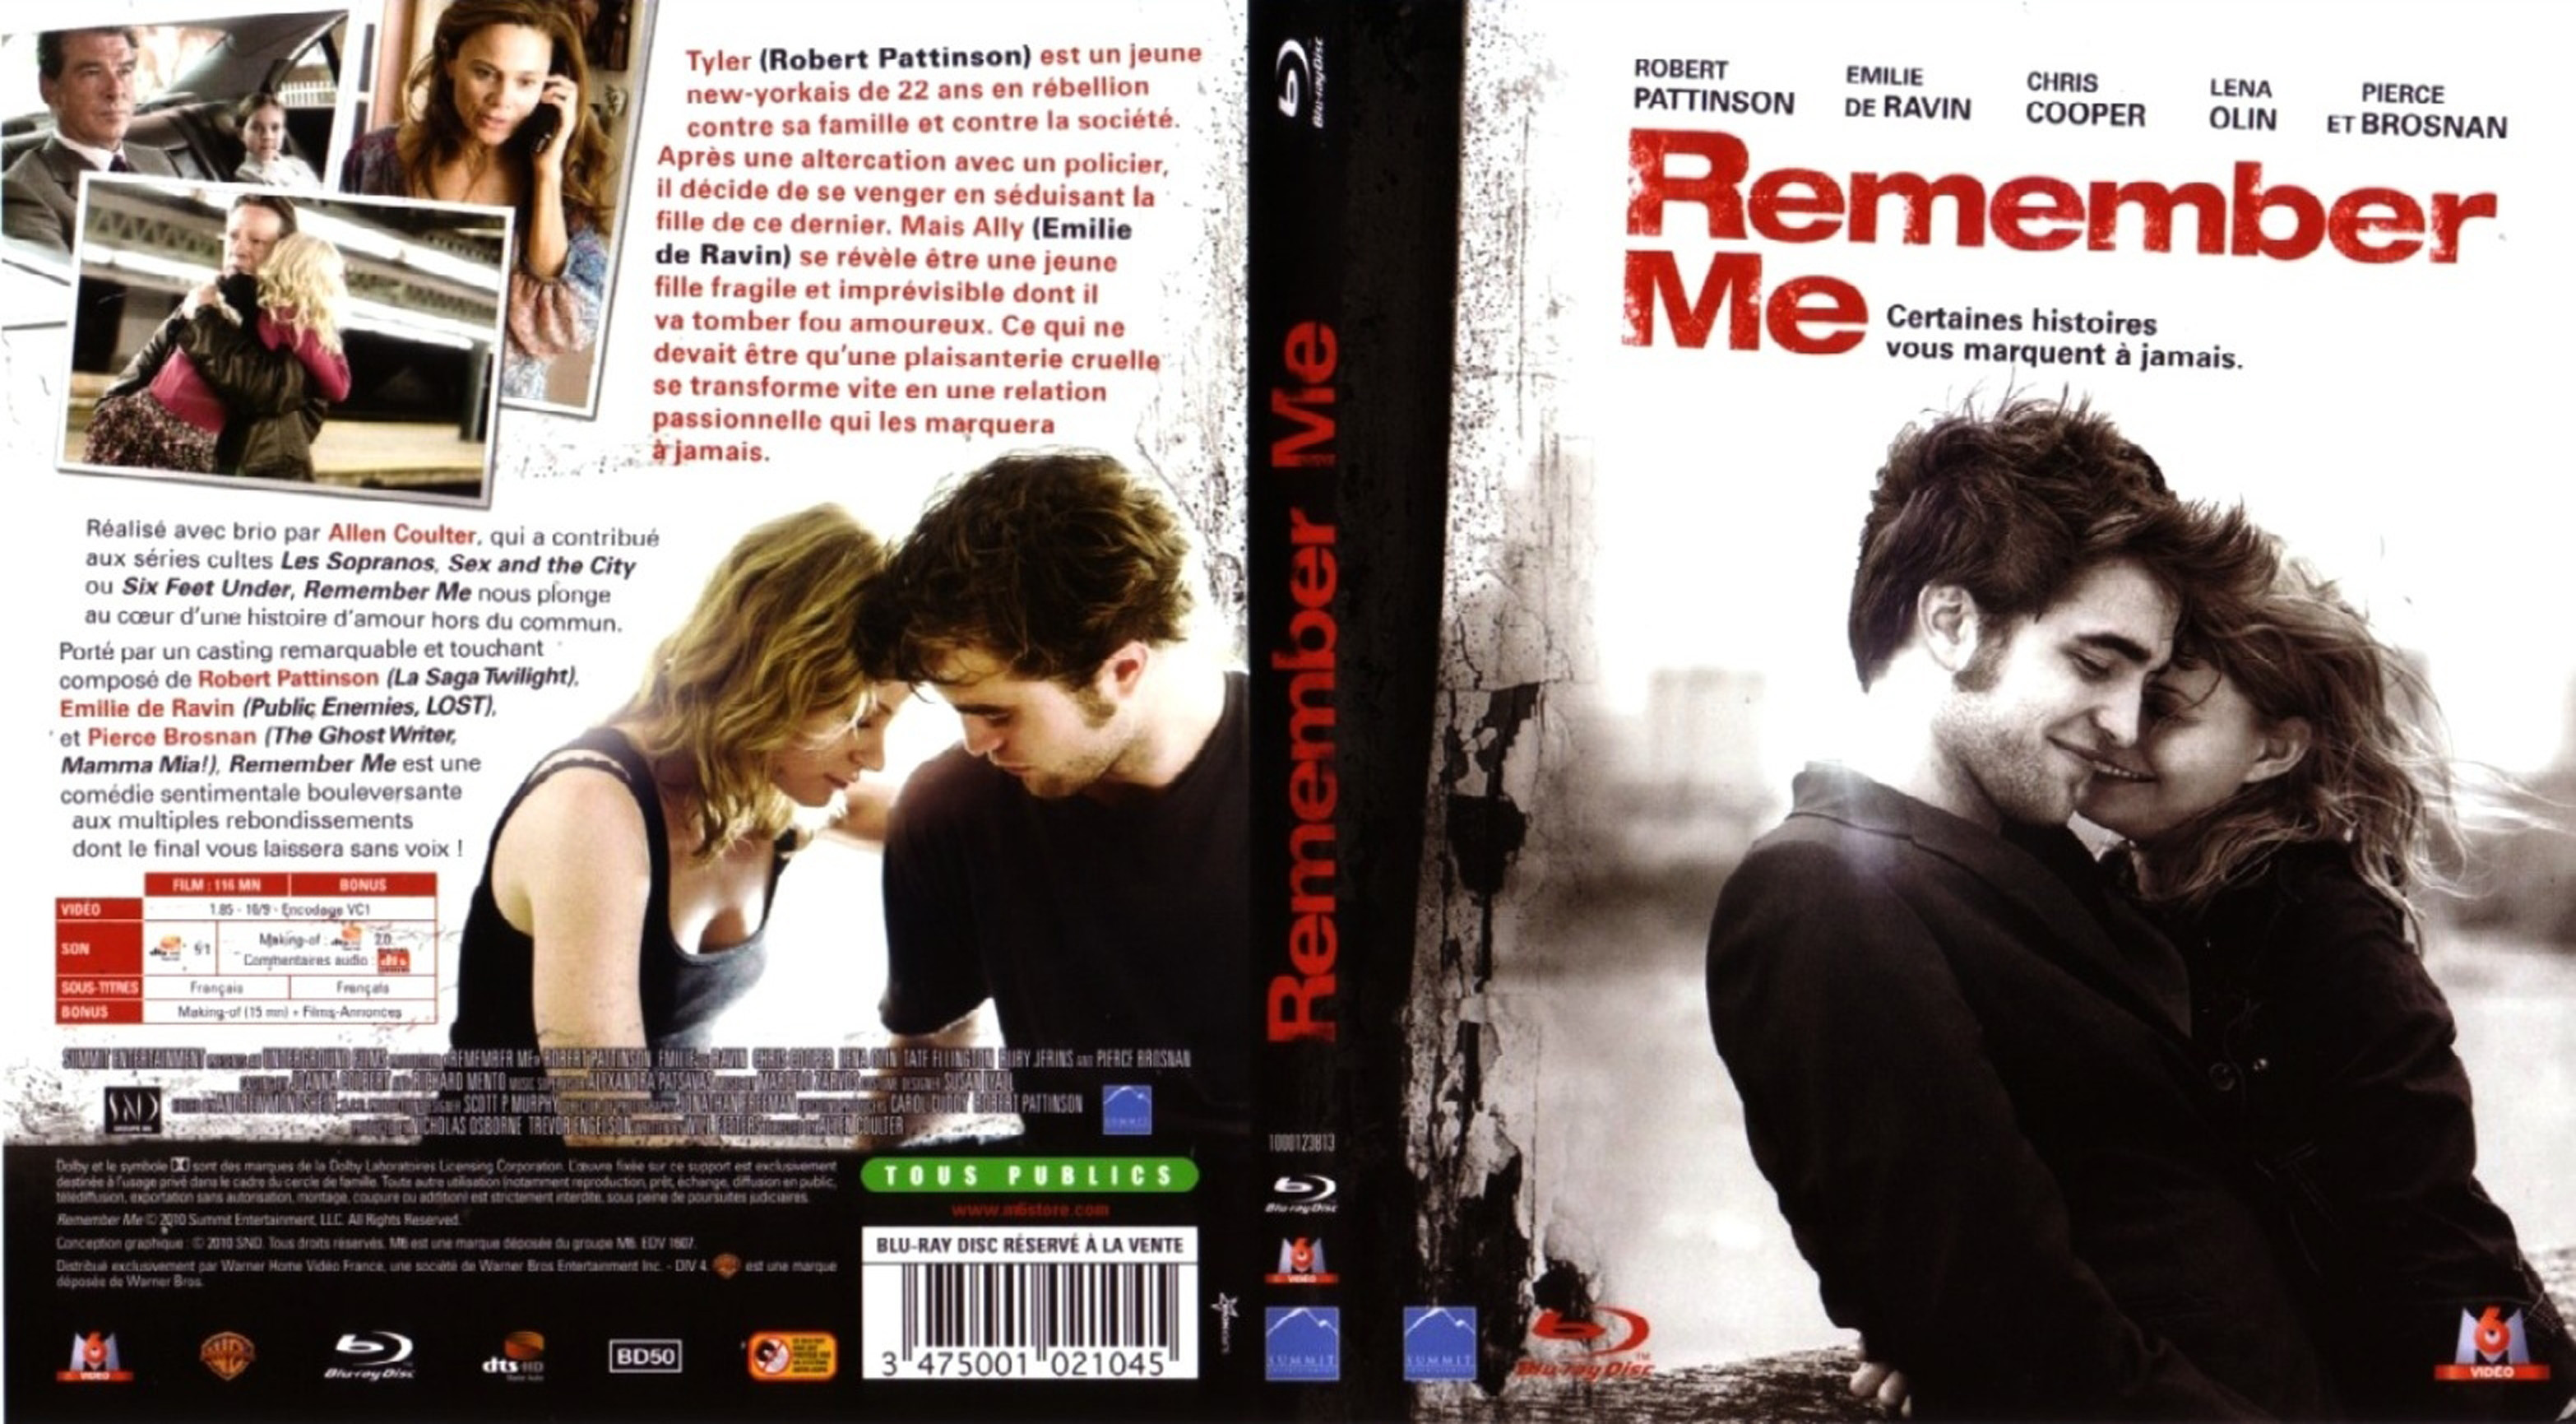 Jaquette DVD Remember me (BLU-RAY)